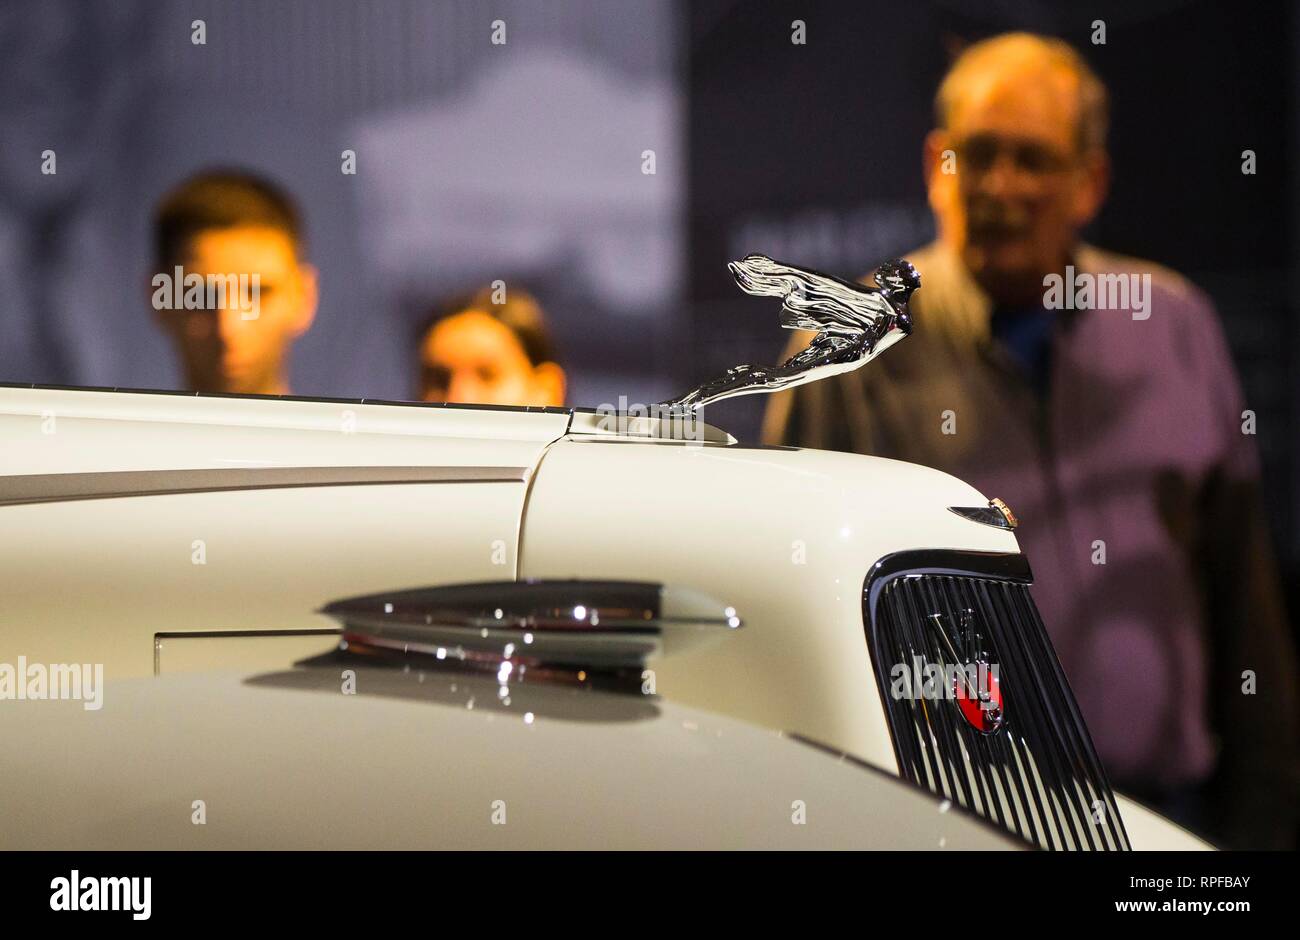 Toronto, Canada. 21st Feb, 2019. Visitors look at a 1937 Cadillac Series 90 Hartmann Cabriolet during the Art and the Automobile exhibition of the 2019 Canadian International Auto Show (CIAS) at the Metro Toronto Convention Center in Toronto, Canada, Feb. 21, 2019. Featuring 15 rare and classic cars, the exhibition runs from Feb. 15 to 24 at the 2019 CIAS. Credit: Zou Zheng/Xinhua/Alamy Live News Stock Photo